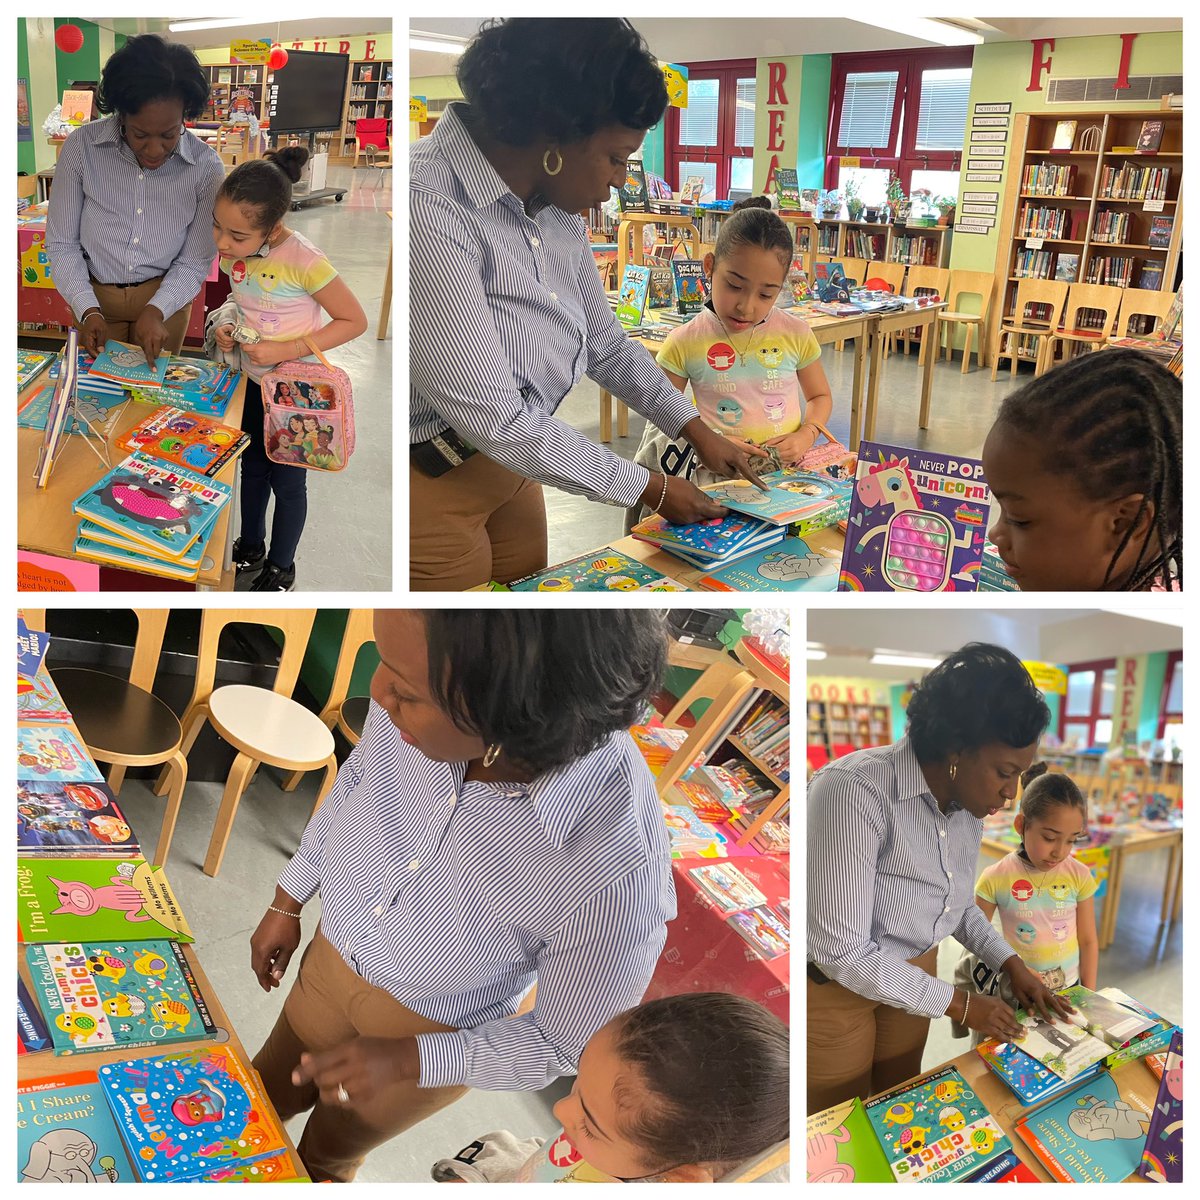 A haven for our students to become intellectually free. Our administrator @APWardlow believes in choosing the just right book. #District5 #ArthurTappanReads #RobinHoodLibrary @psms46Harlem @LMitchellPSMS46 @APWardlow @DrHazell20 @District5NYC @nypl @nycsla @SeanLDavenport